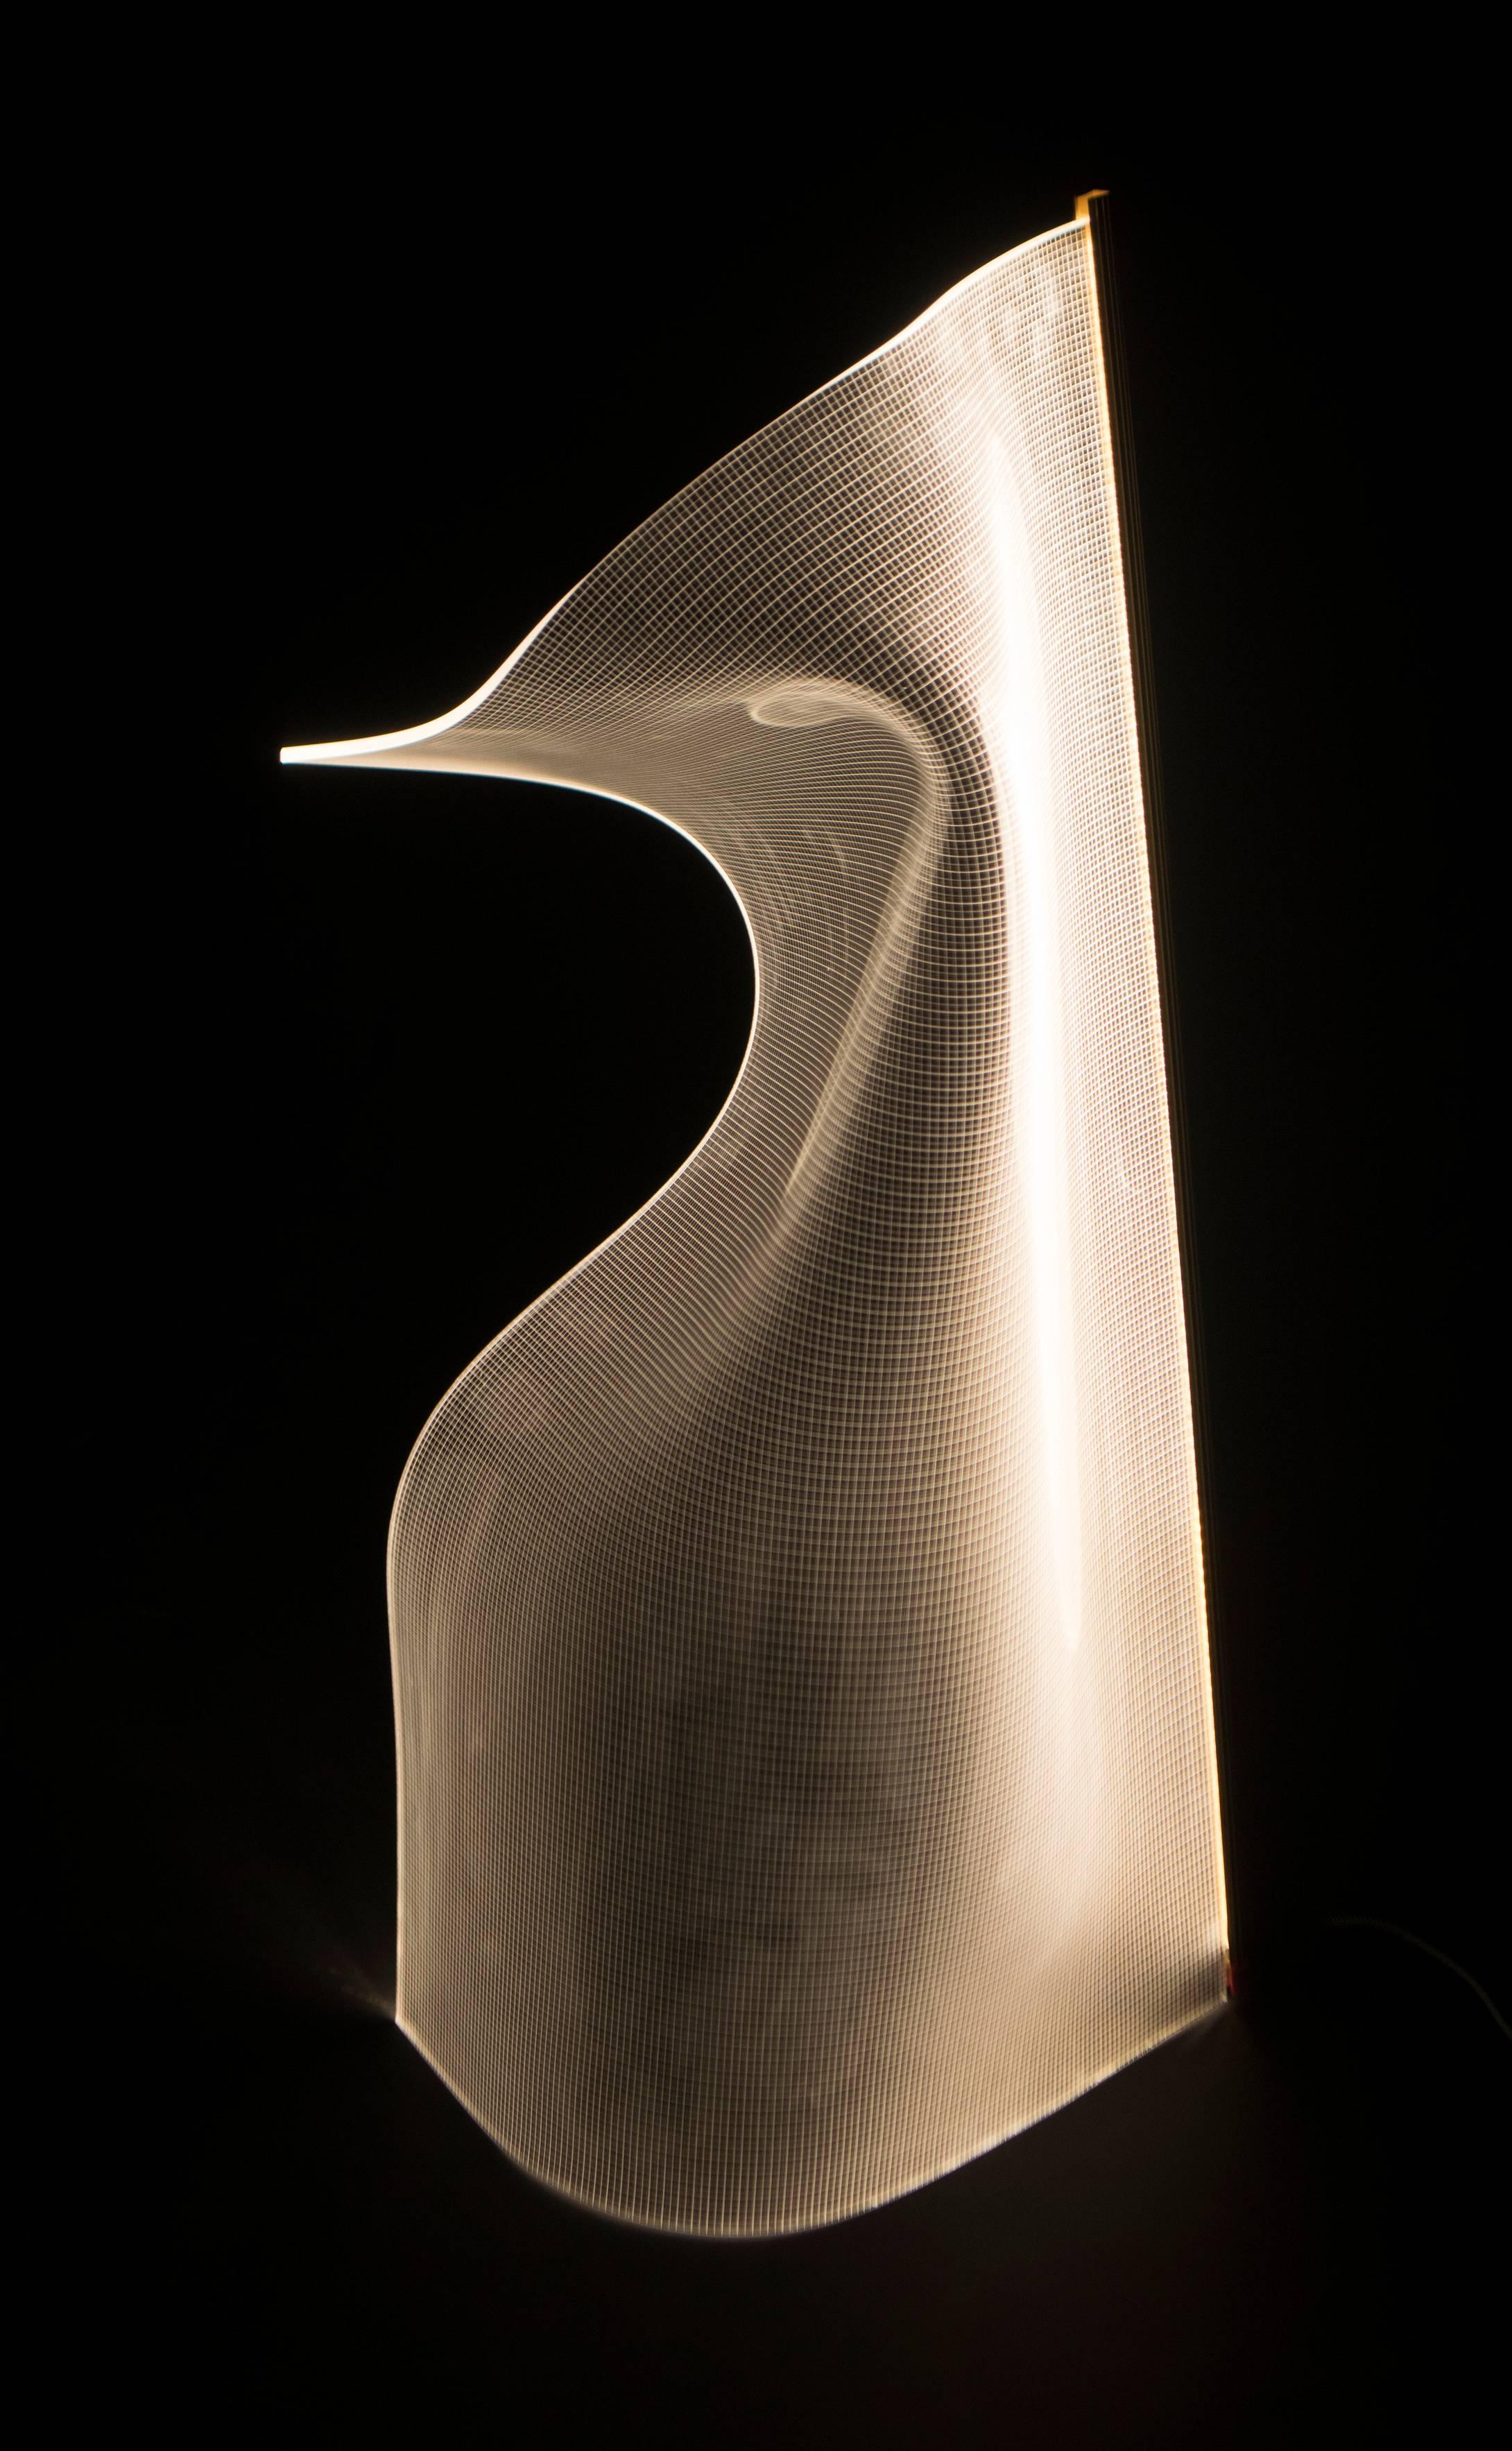 Hand-Crafted Gweilo Lamp by Partisans